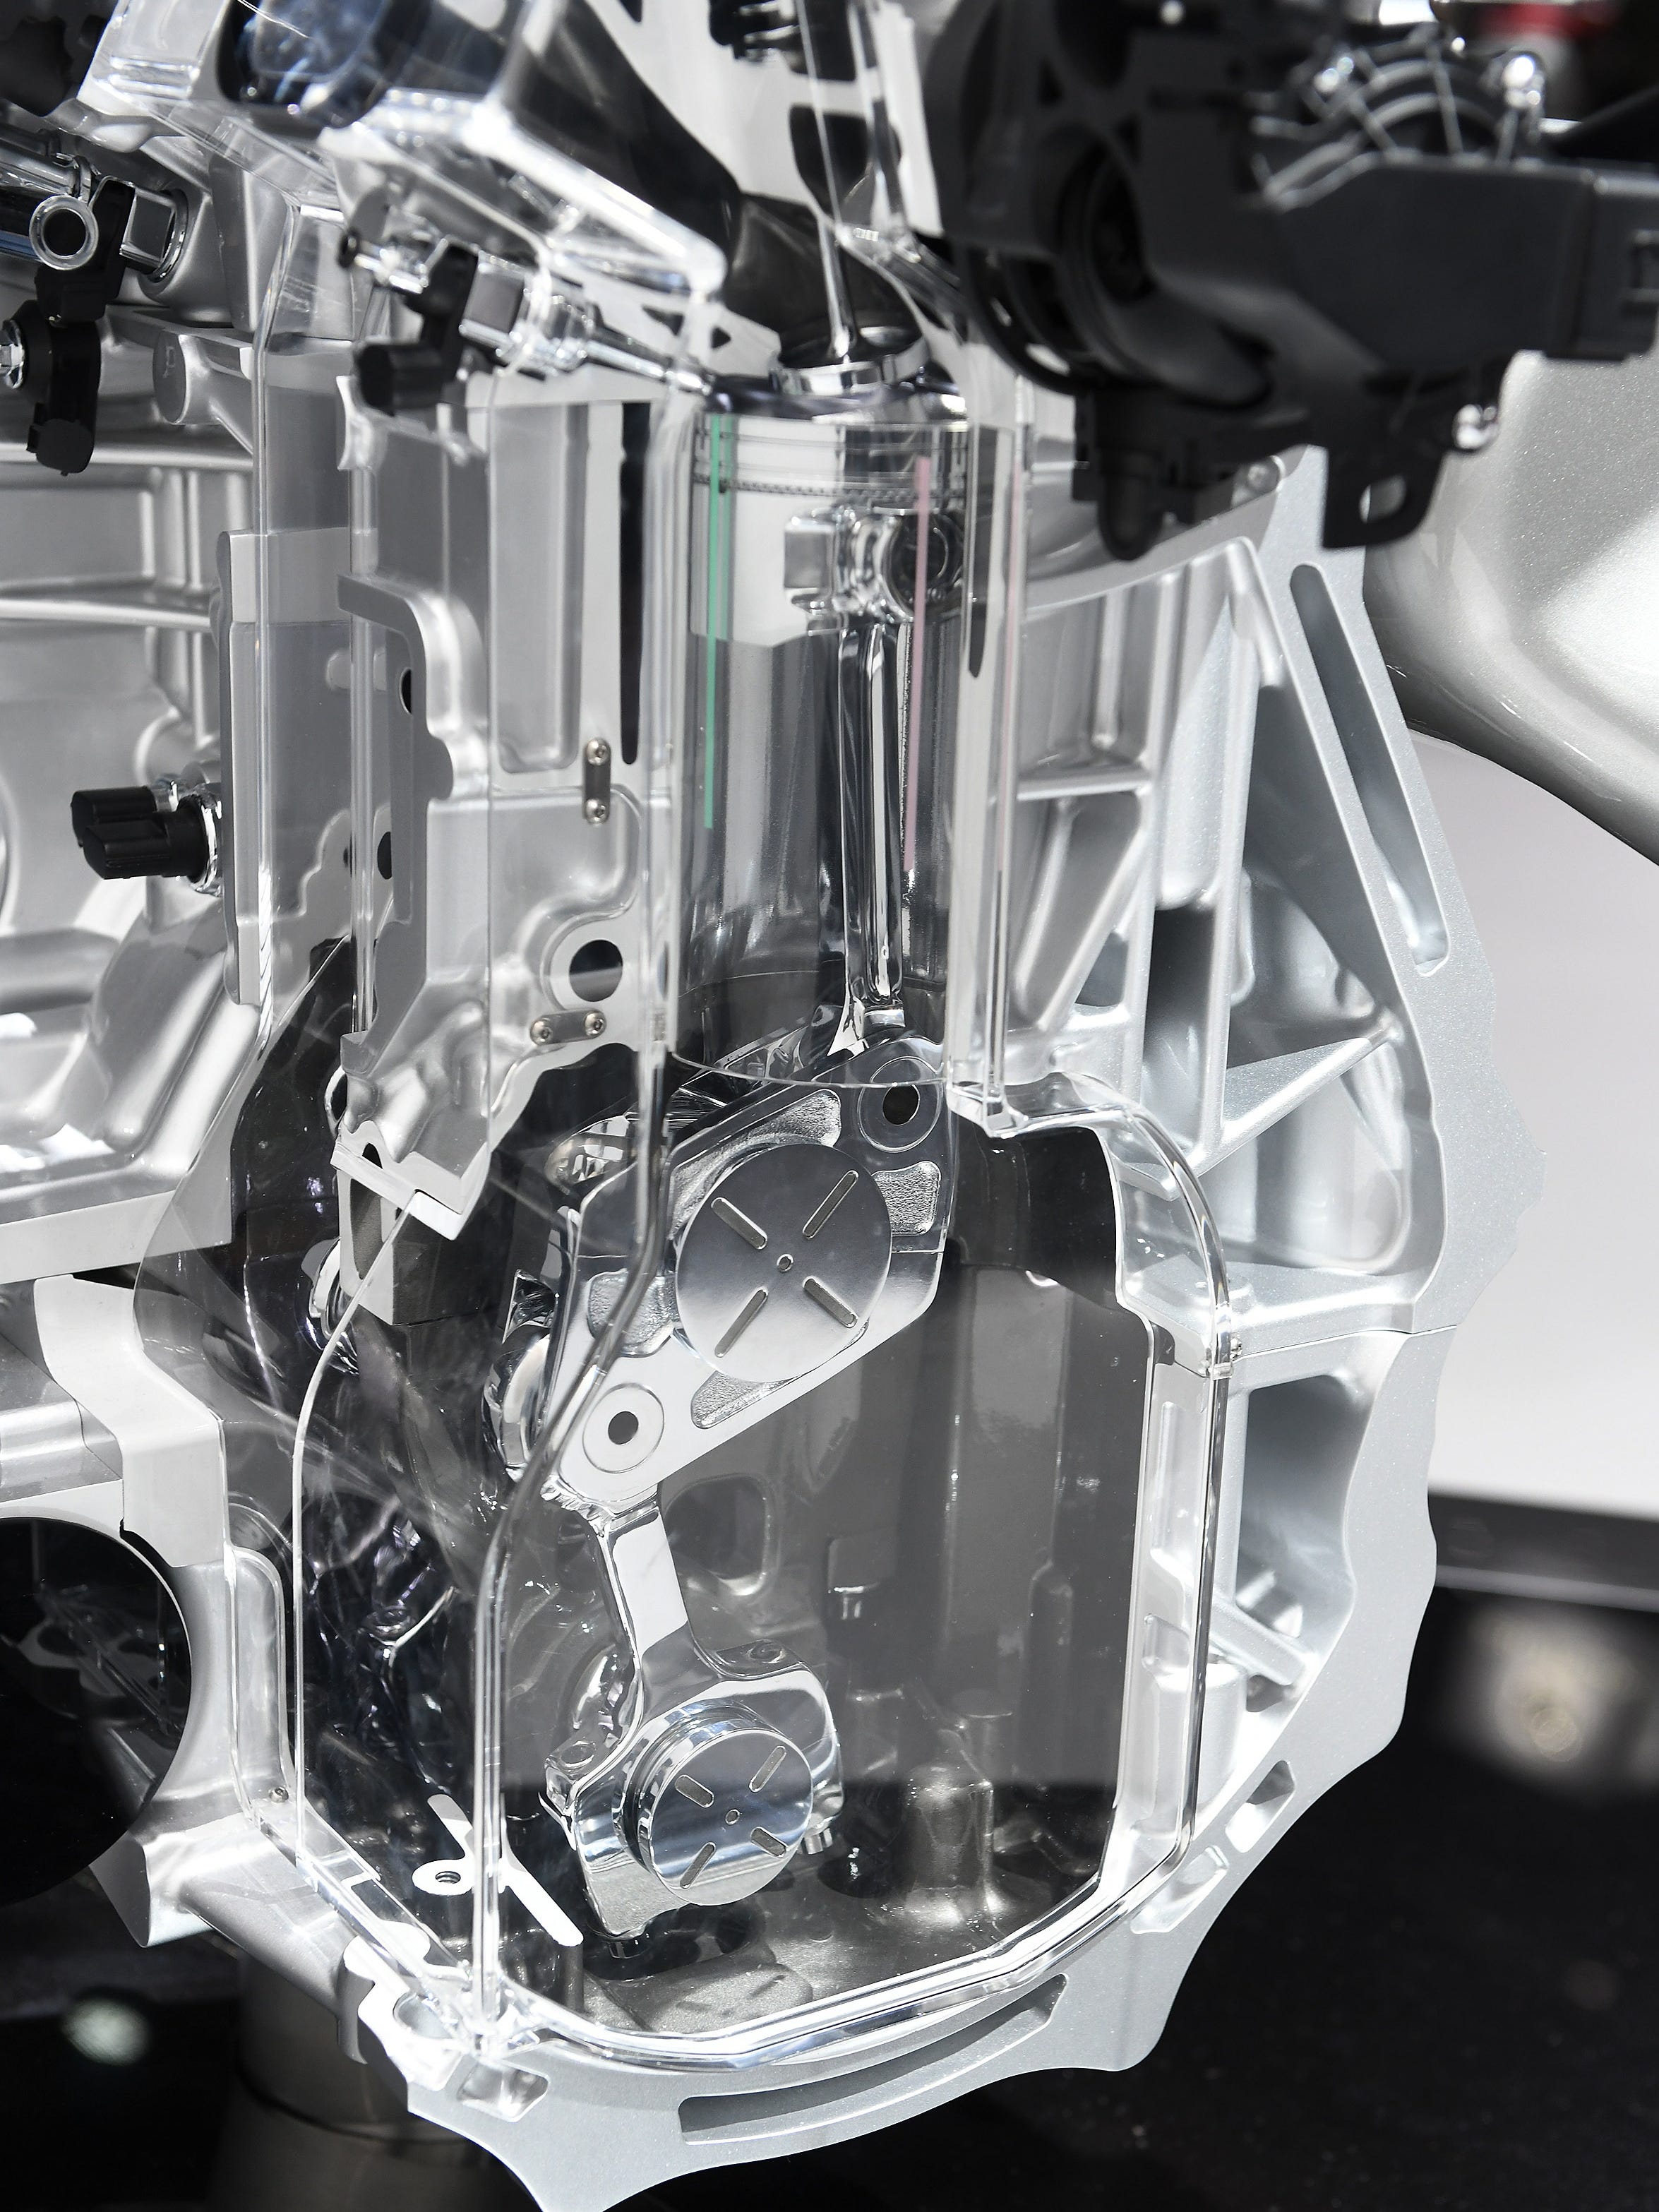 This is a see through model of the Infiniti variable compression engine.